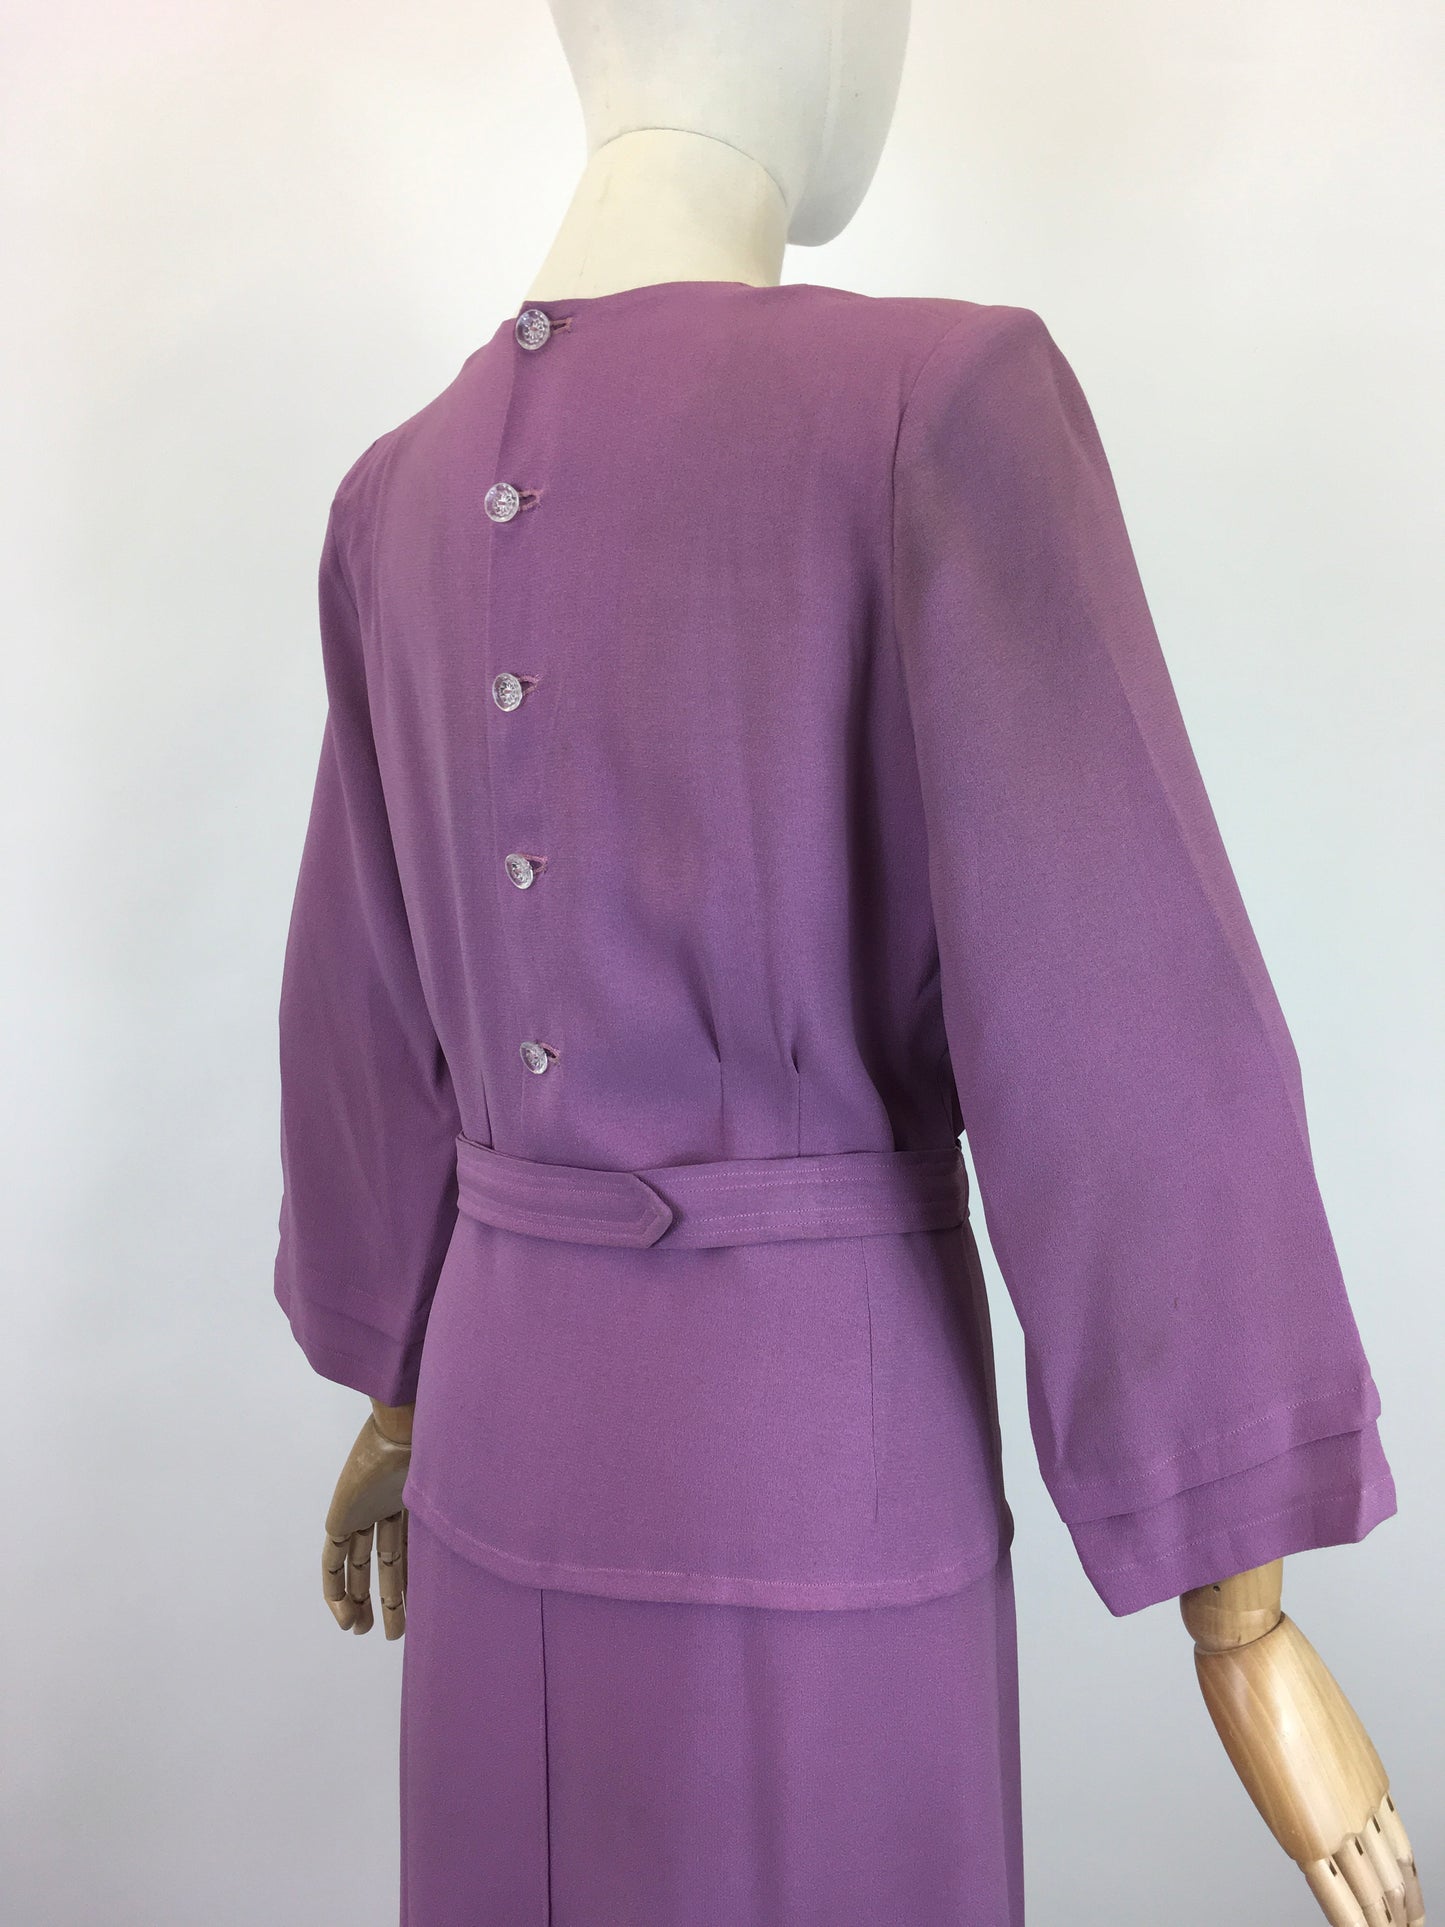 Original 1930’s Stunning Crepe Dress - In a Powdered Lilac